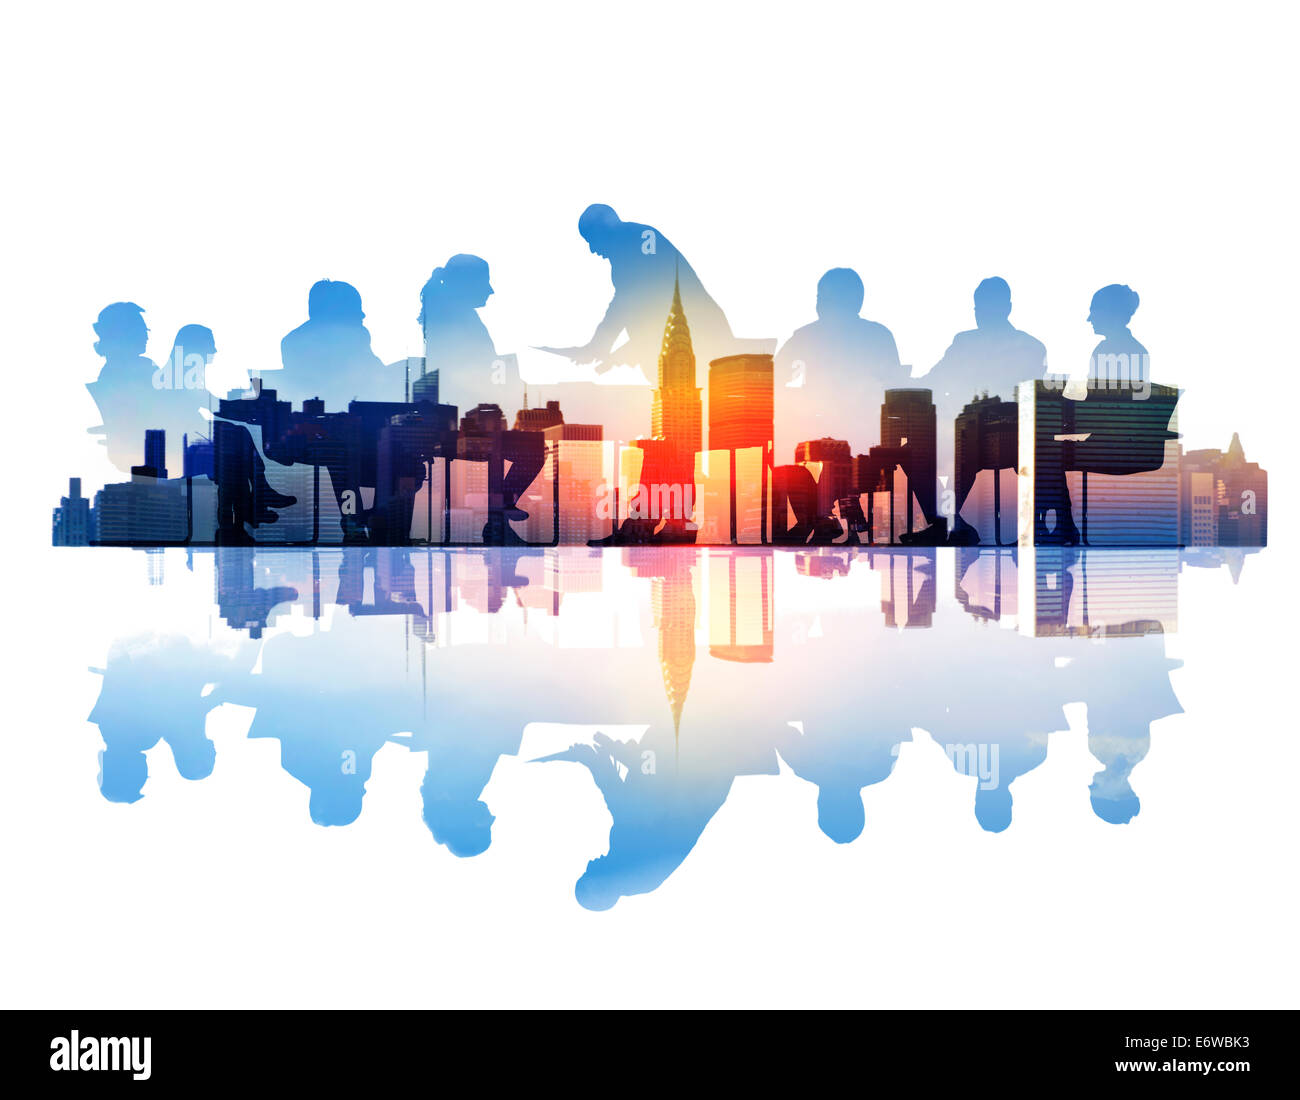 Silhouette of Business Meeting in a Cityscape Stock Photo